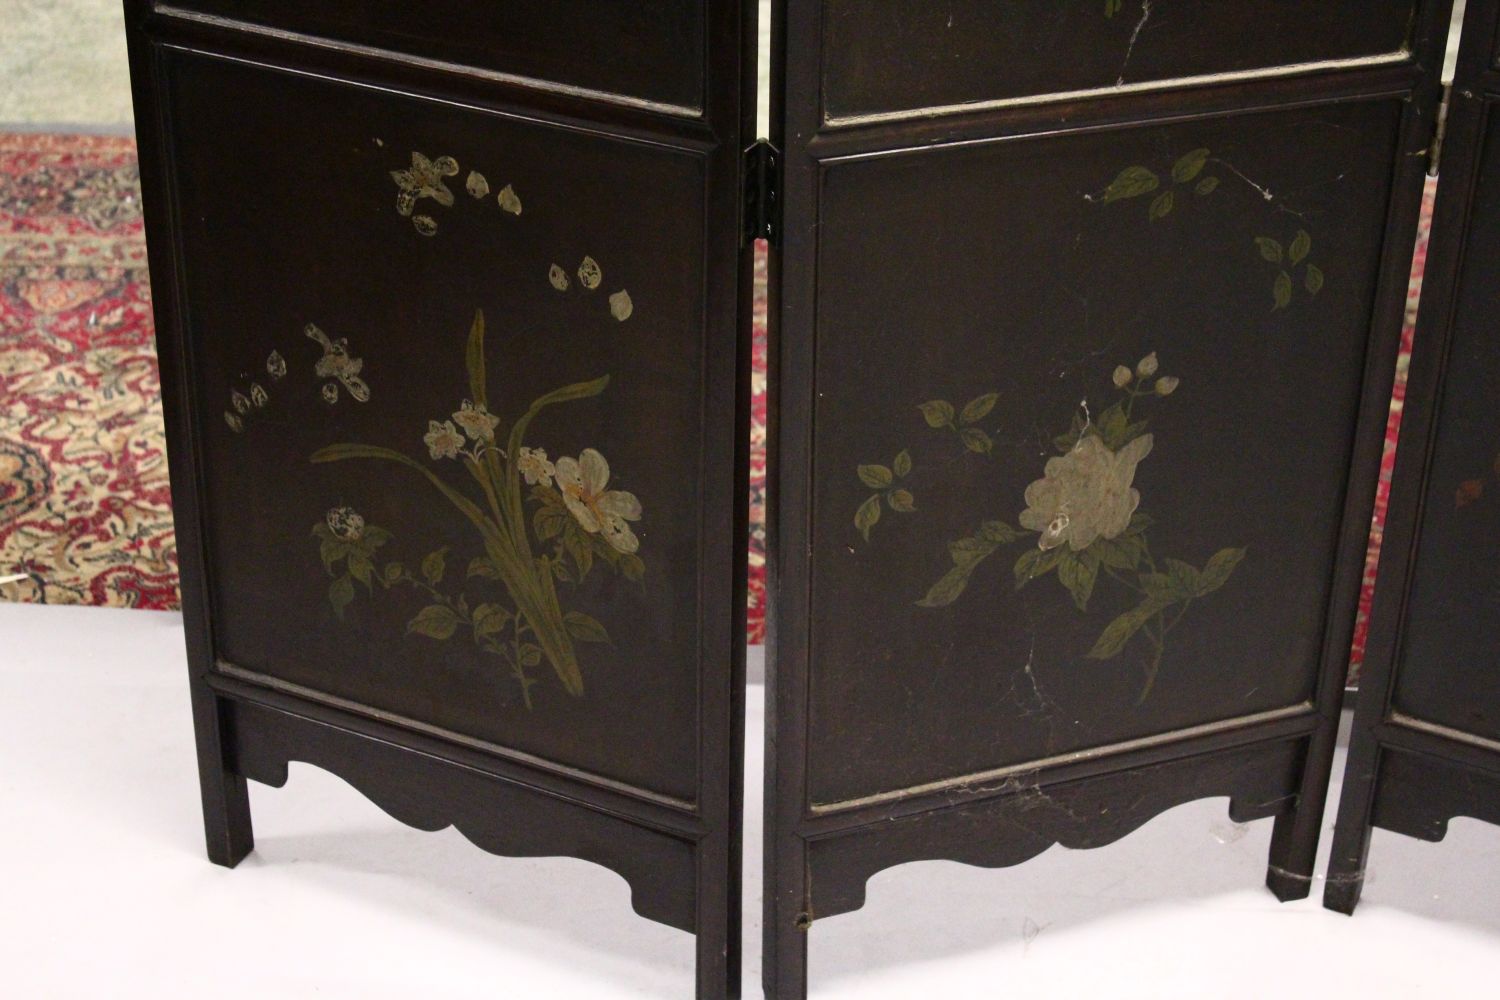 A 19TH CENTURY CHINESE HARDWOOD AND INLAID FOUR FOLD SCREEN, each panel inlaid with carved bone - Image 7 of 9